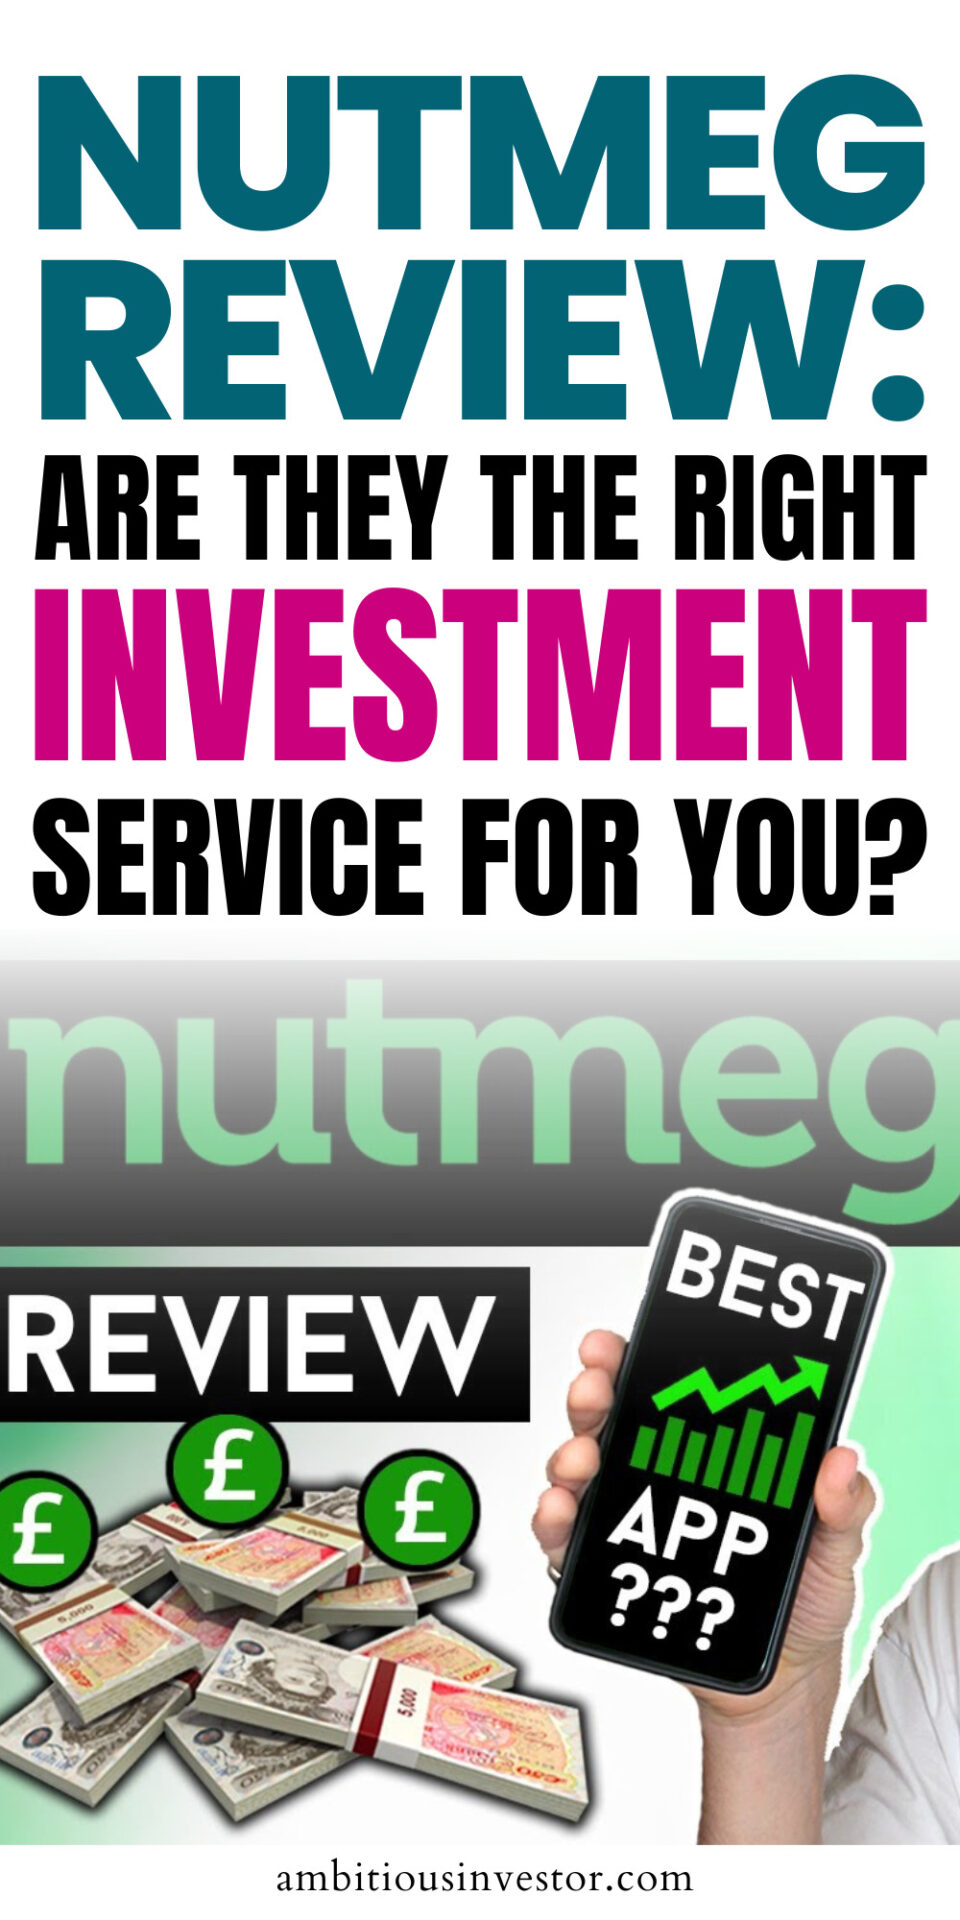 Nutmeg Review – Are they the right investment service for you? 